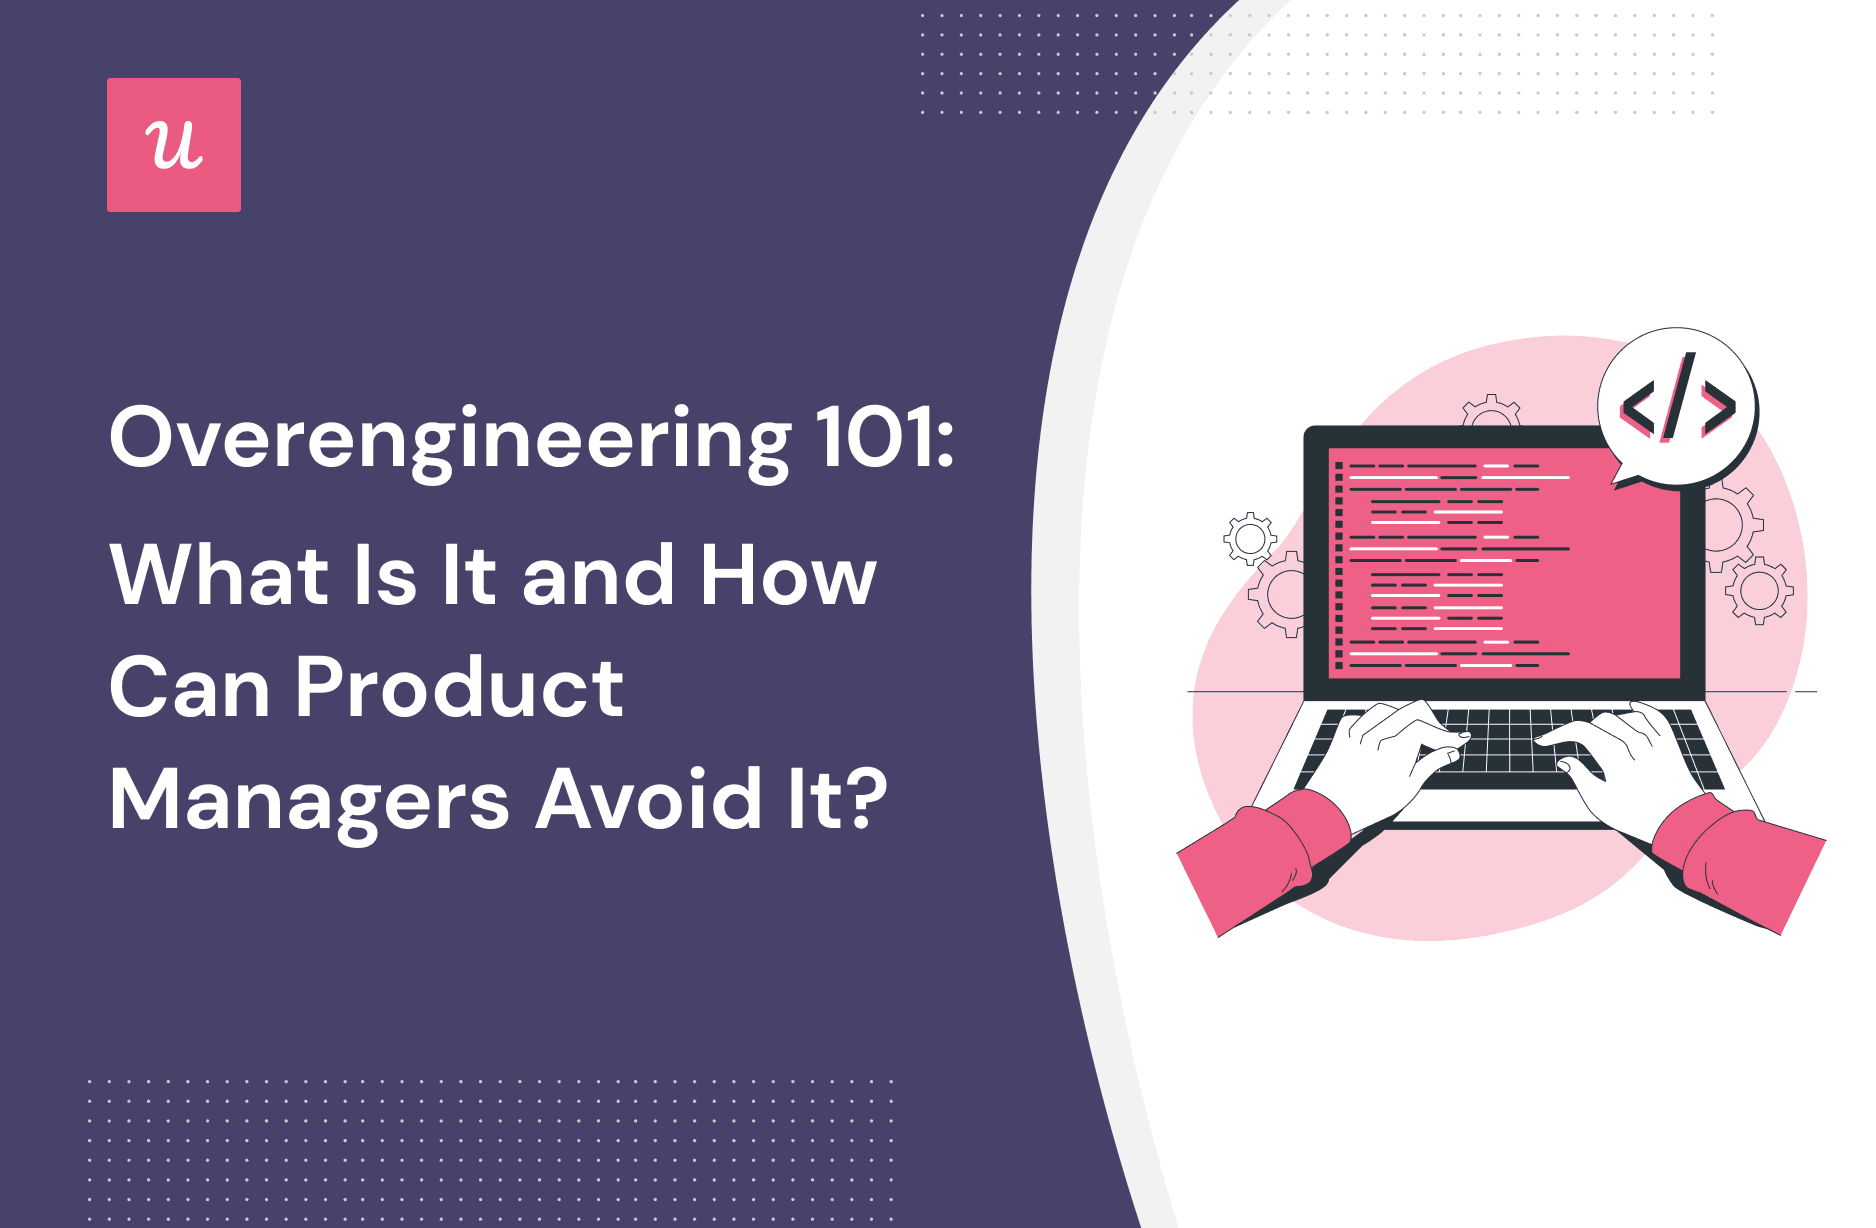 Overengineering 101: What Is It and How Can Product Managers Avoid It? cover